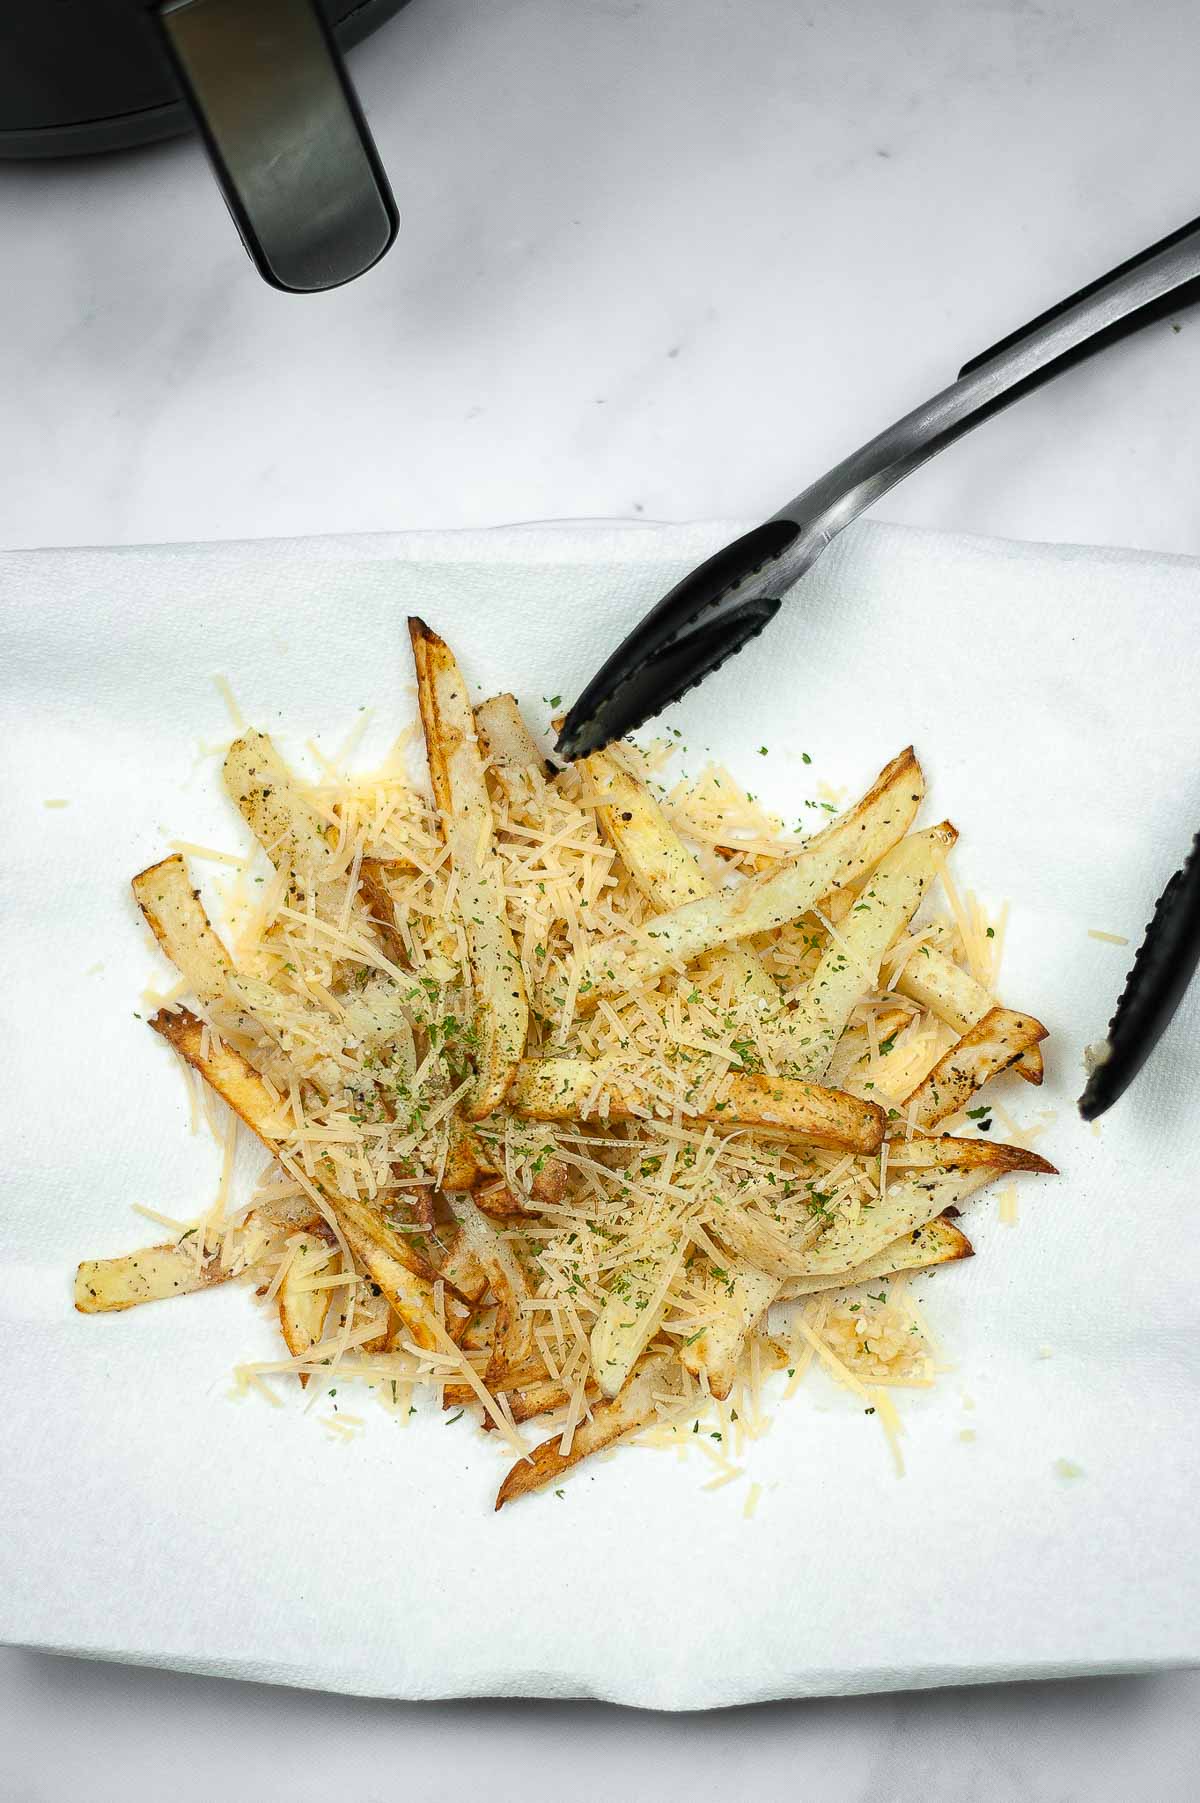 Tossing air fryer French fries with garlic and shredded parmesan